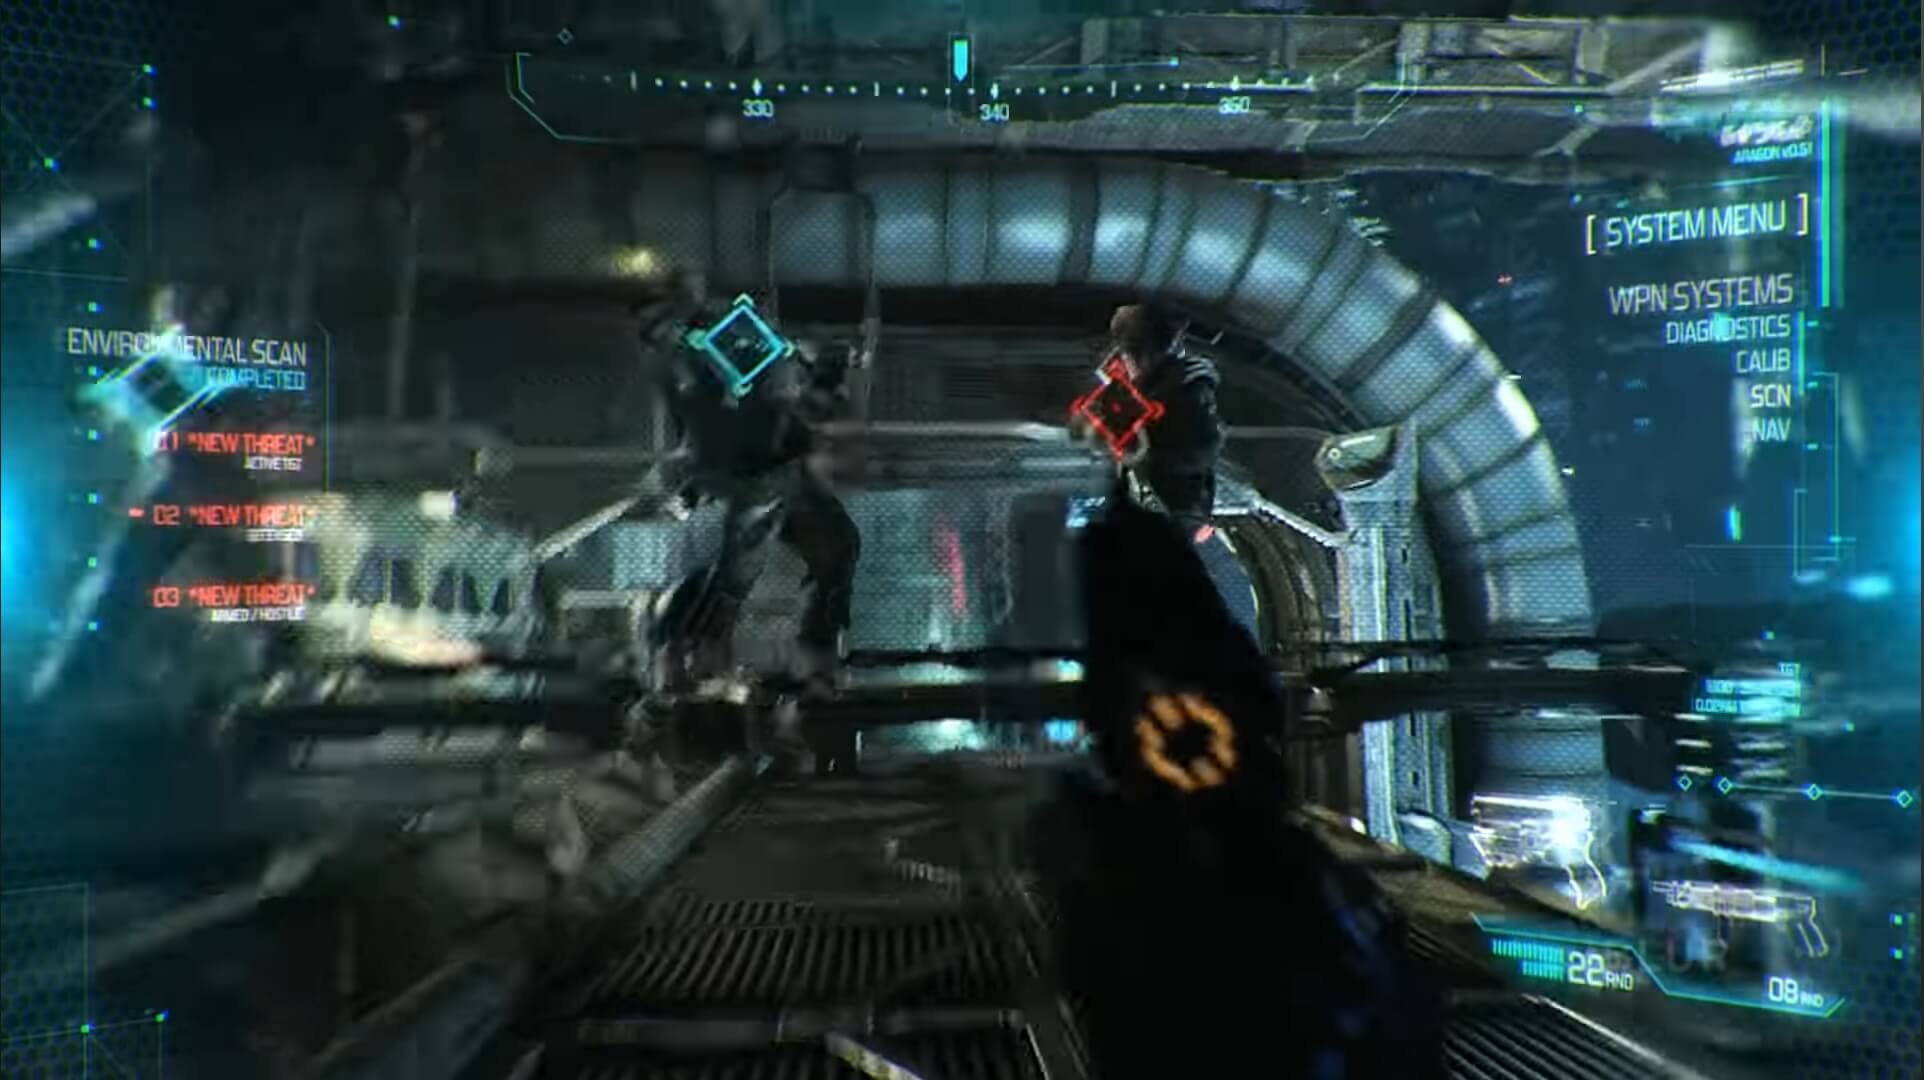 The Prey 2 E3 trailer shows what we were robbed of | Source: Blur Studio (Youtube)